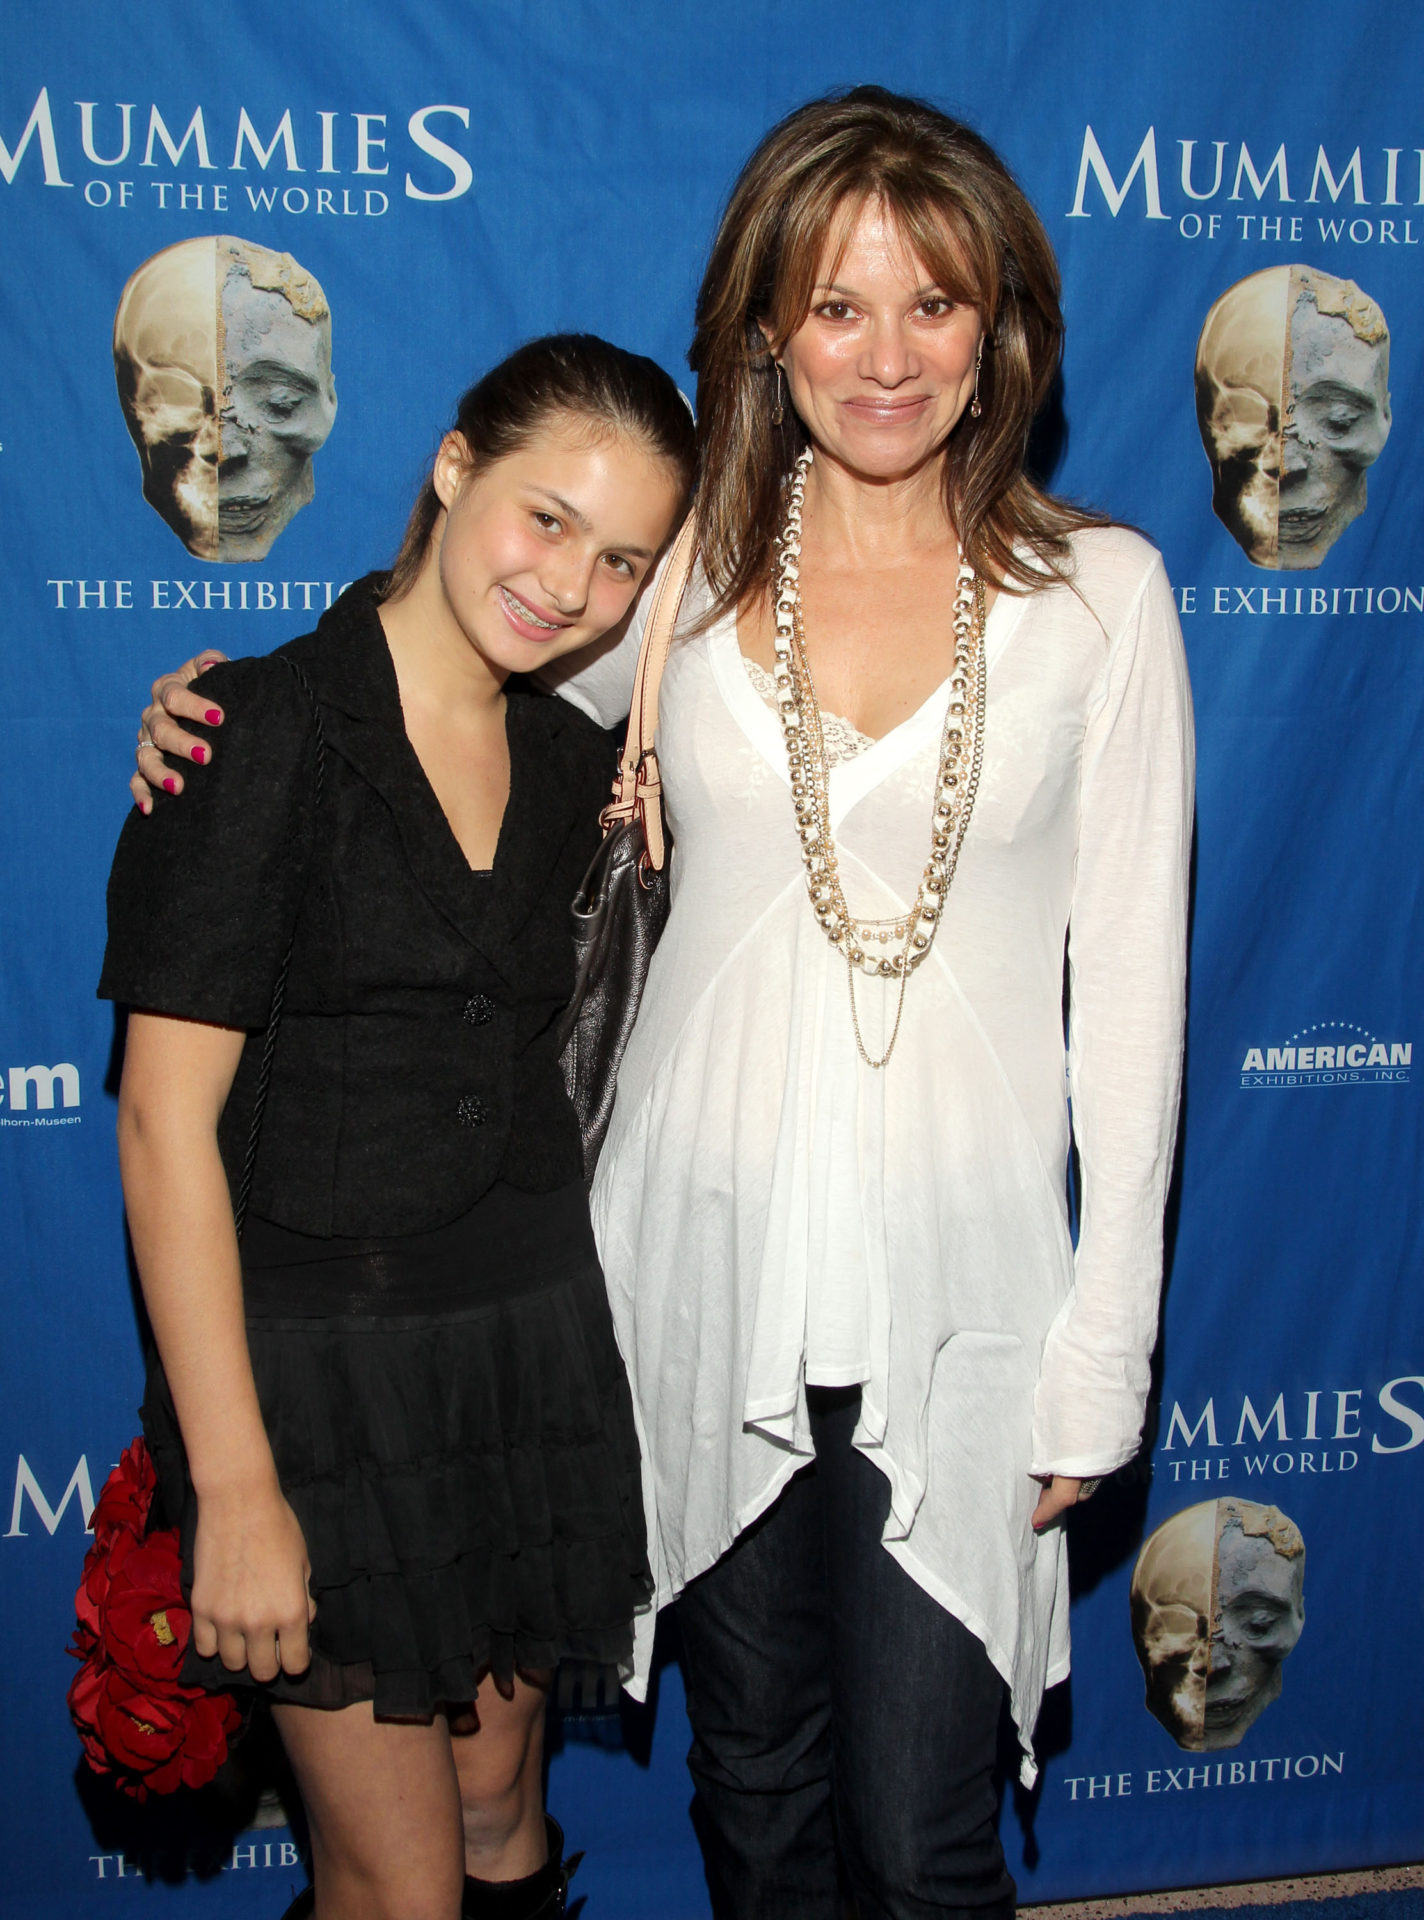 Mummies Of The World Exhibit Celebrity Preview - Arrivals